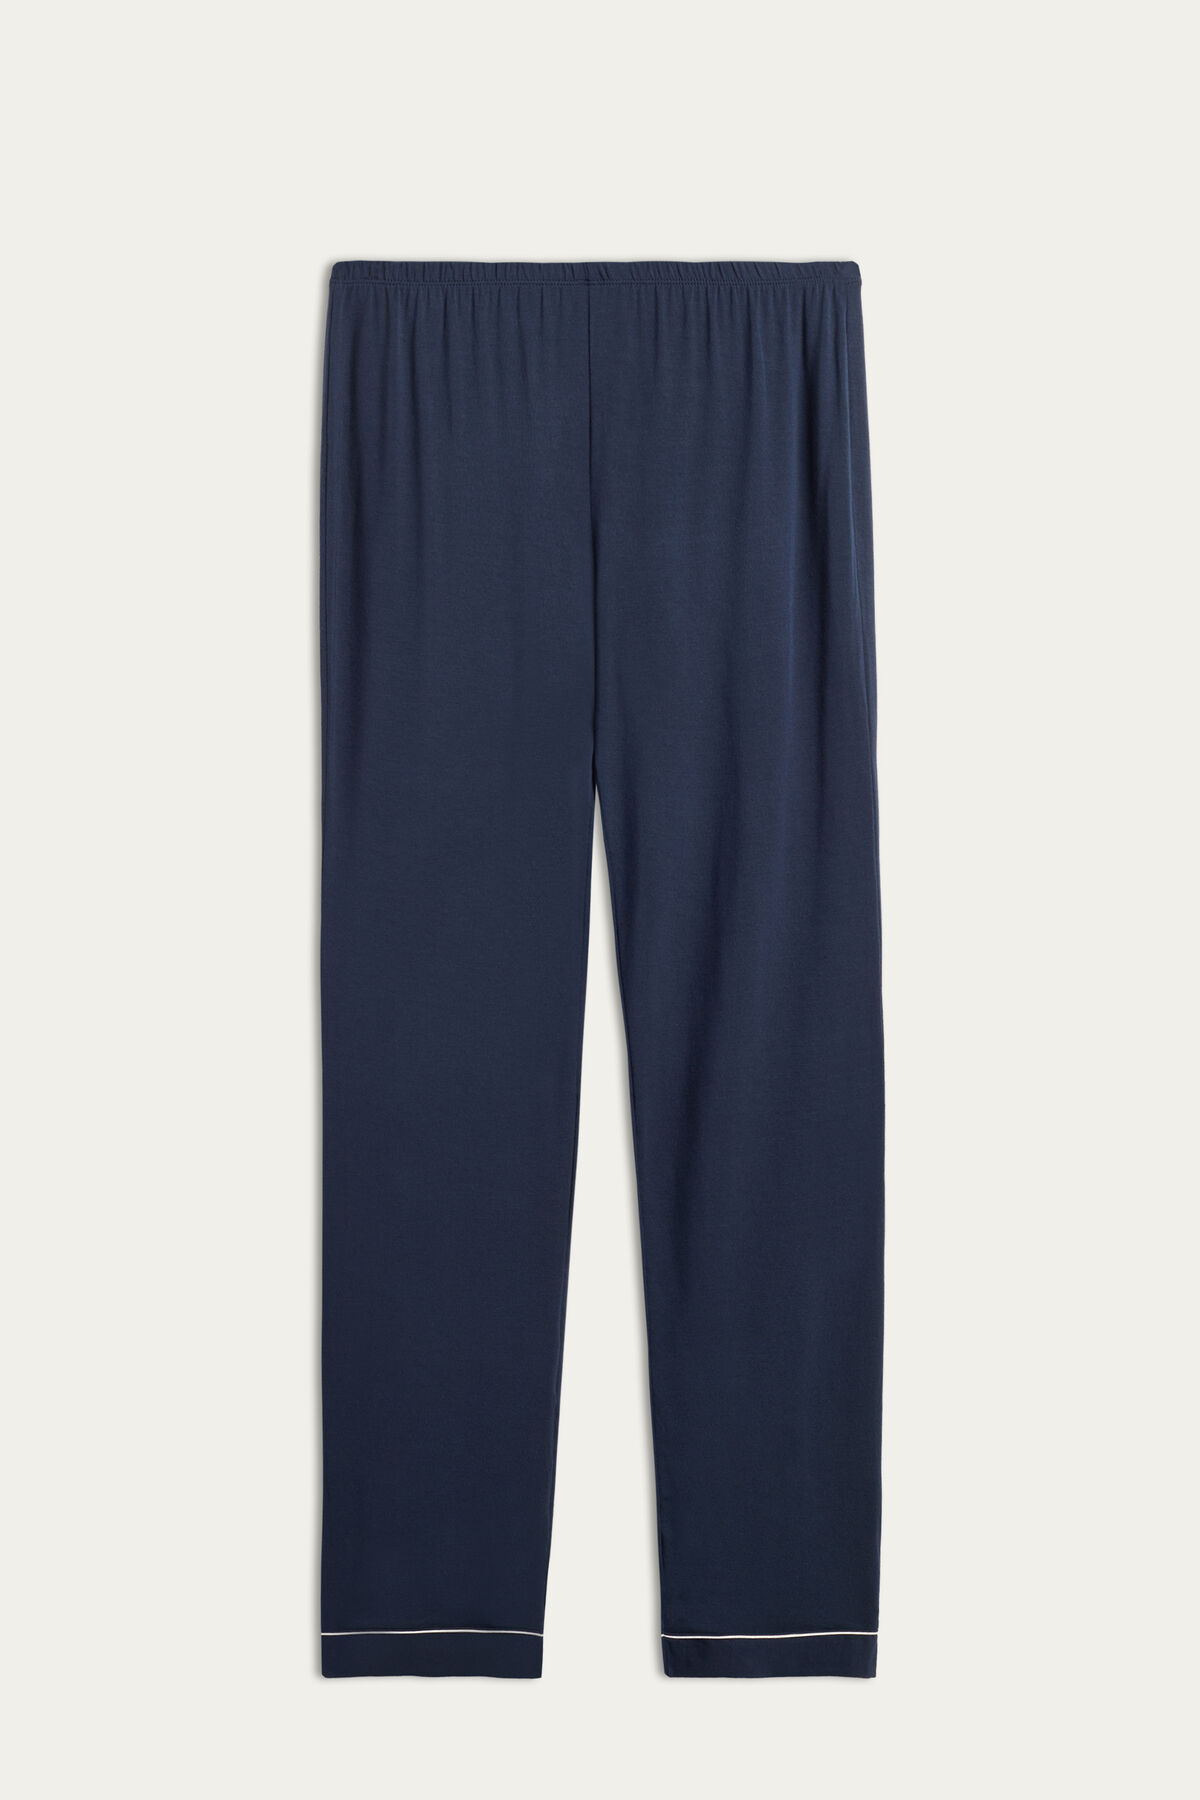 Long Micromodal Trousers | Intimissimi